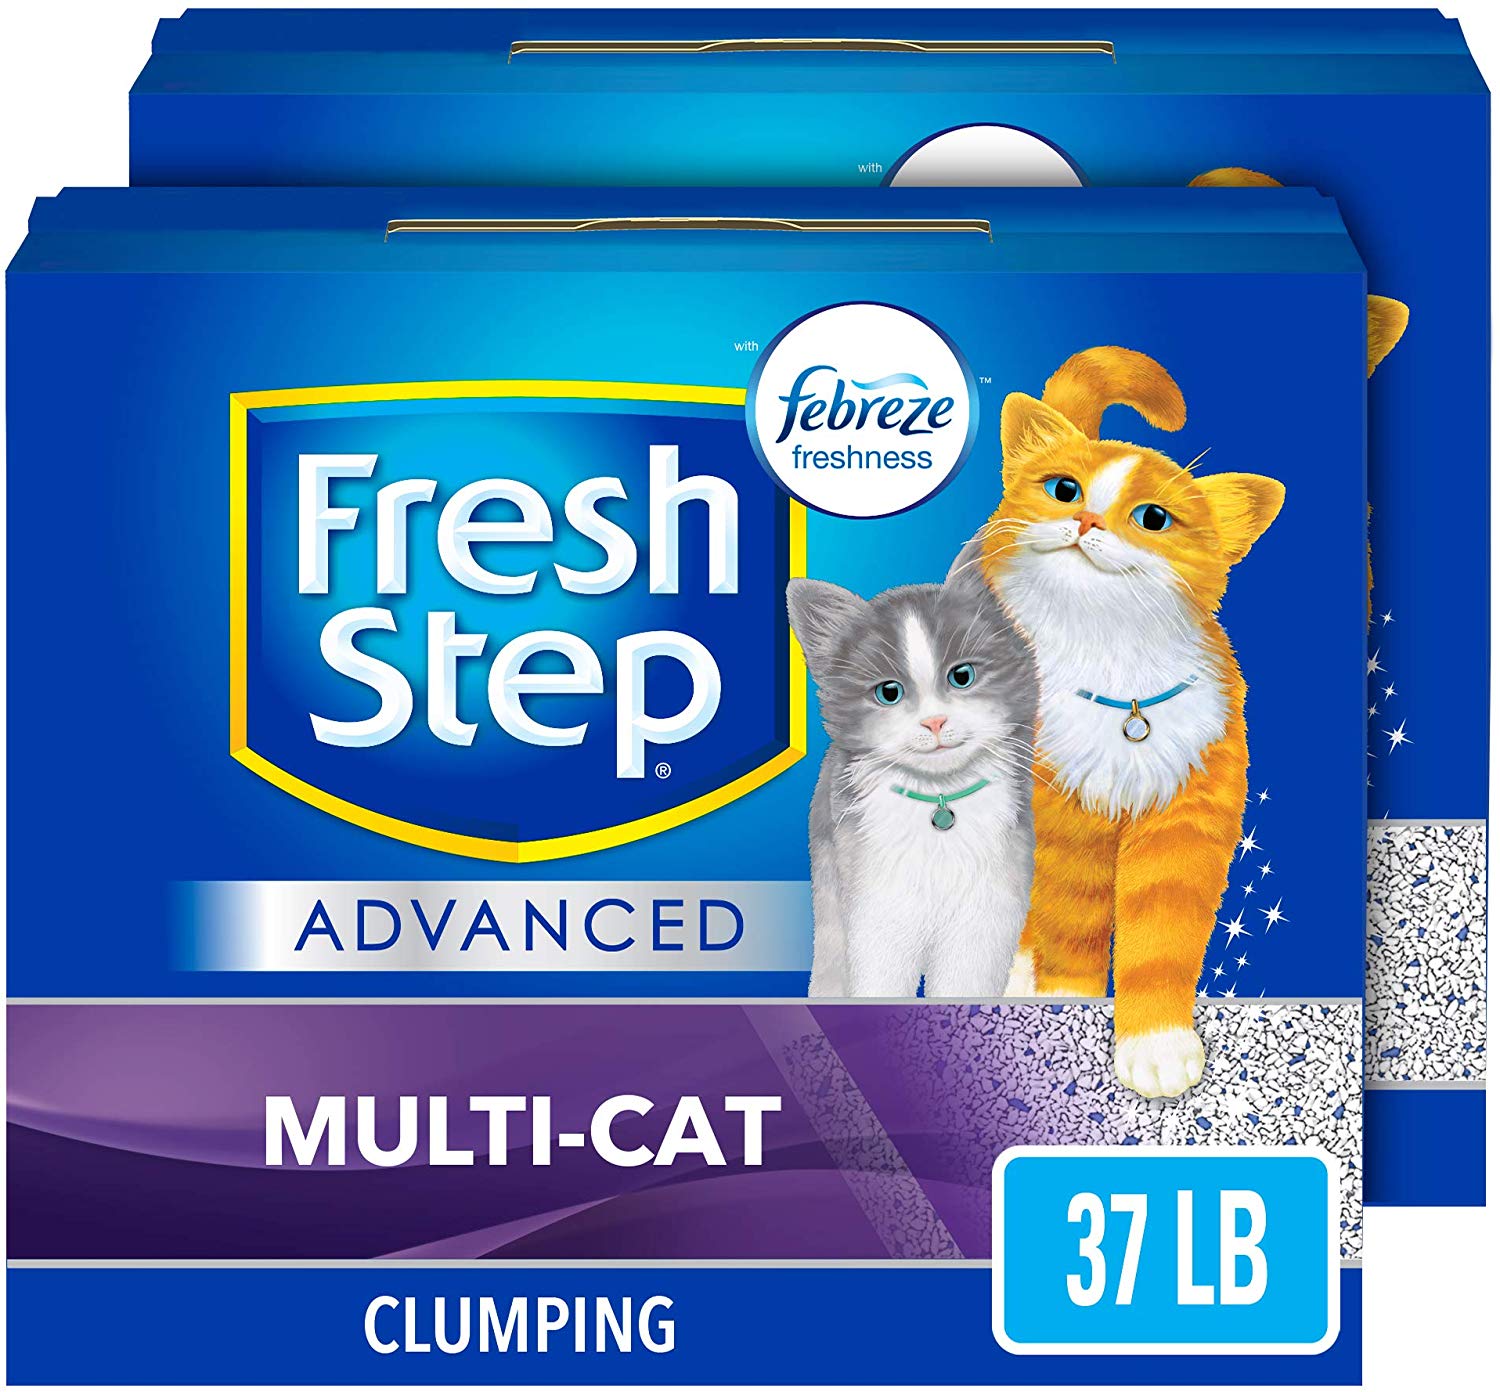 Save up to 30 on NEW Fresh Step Advanced kitty litter